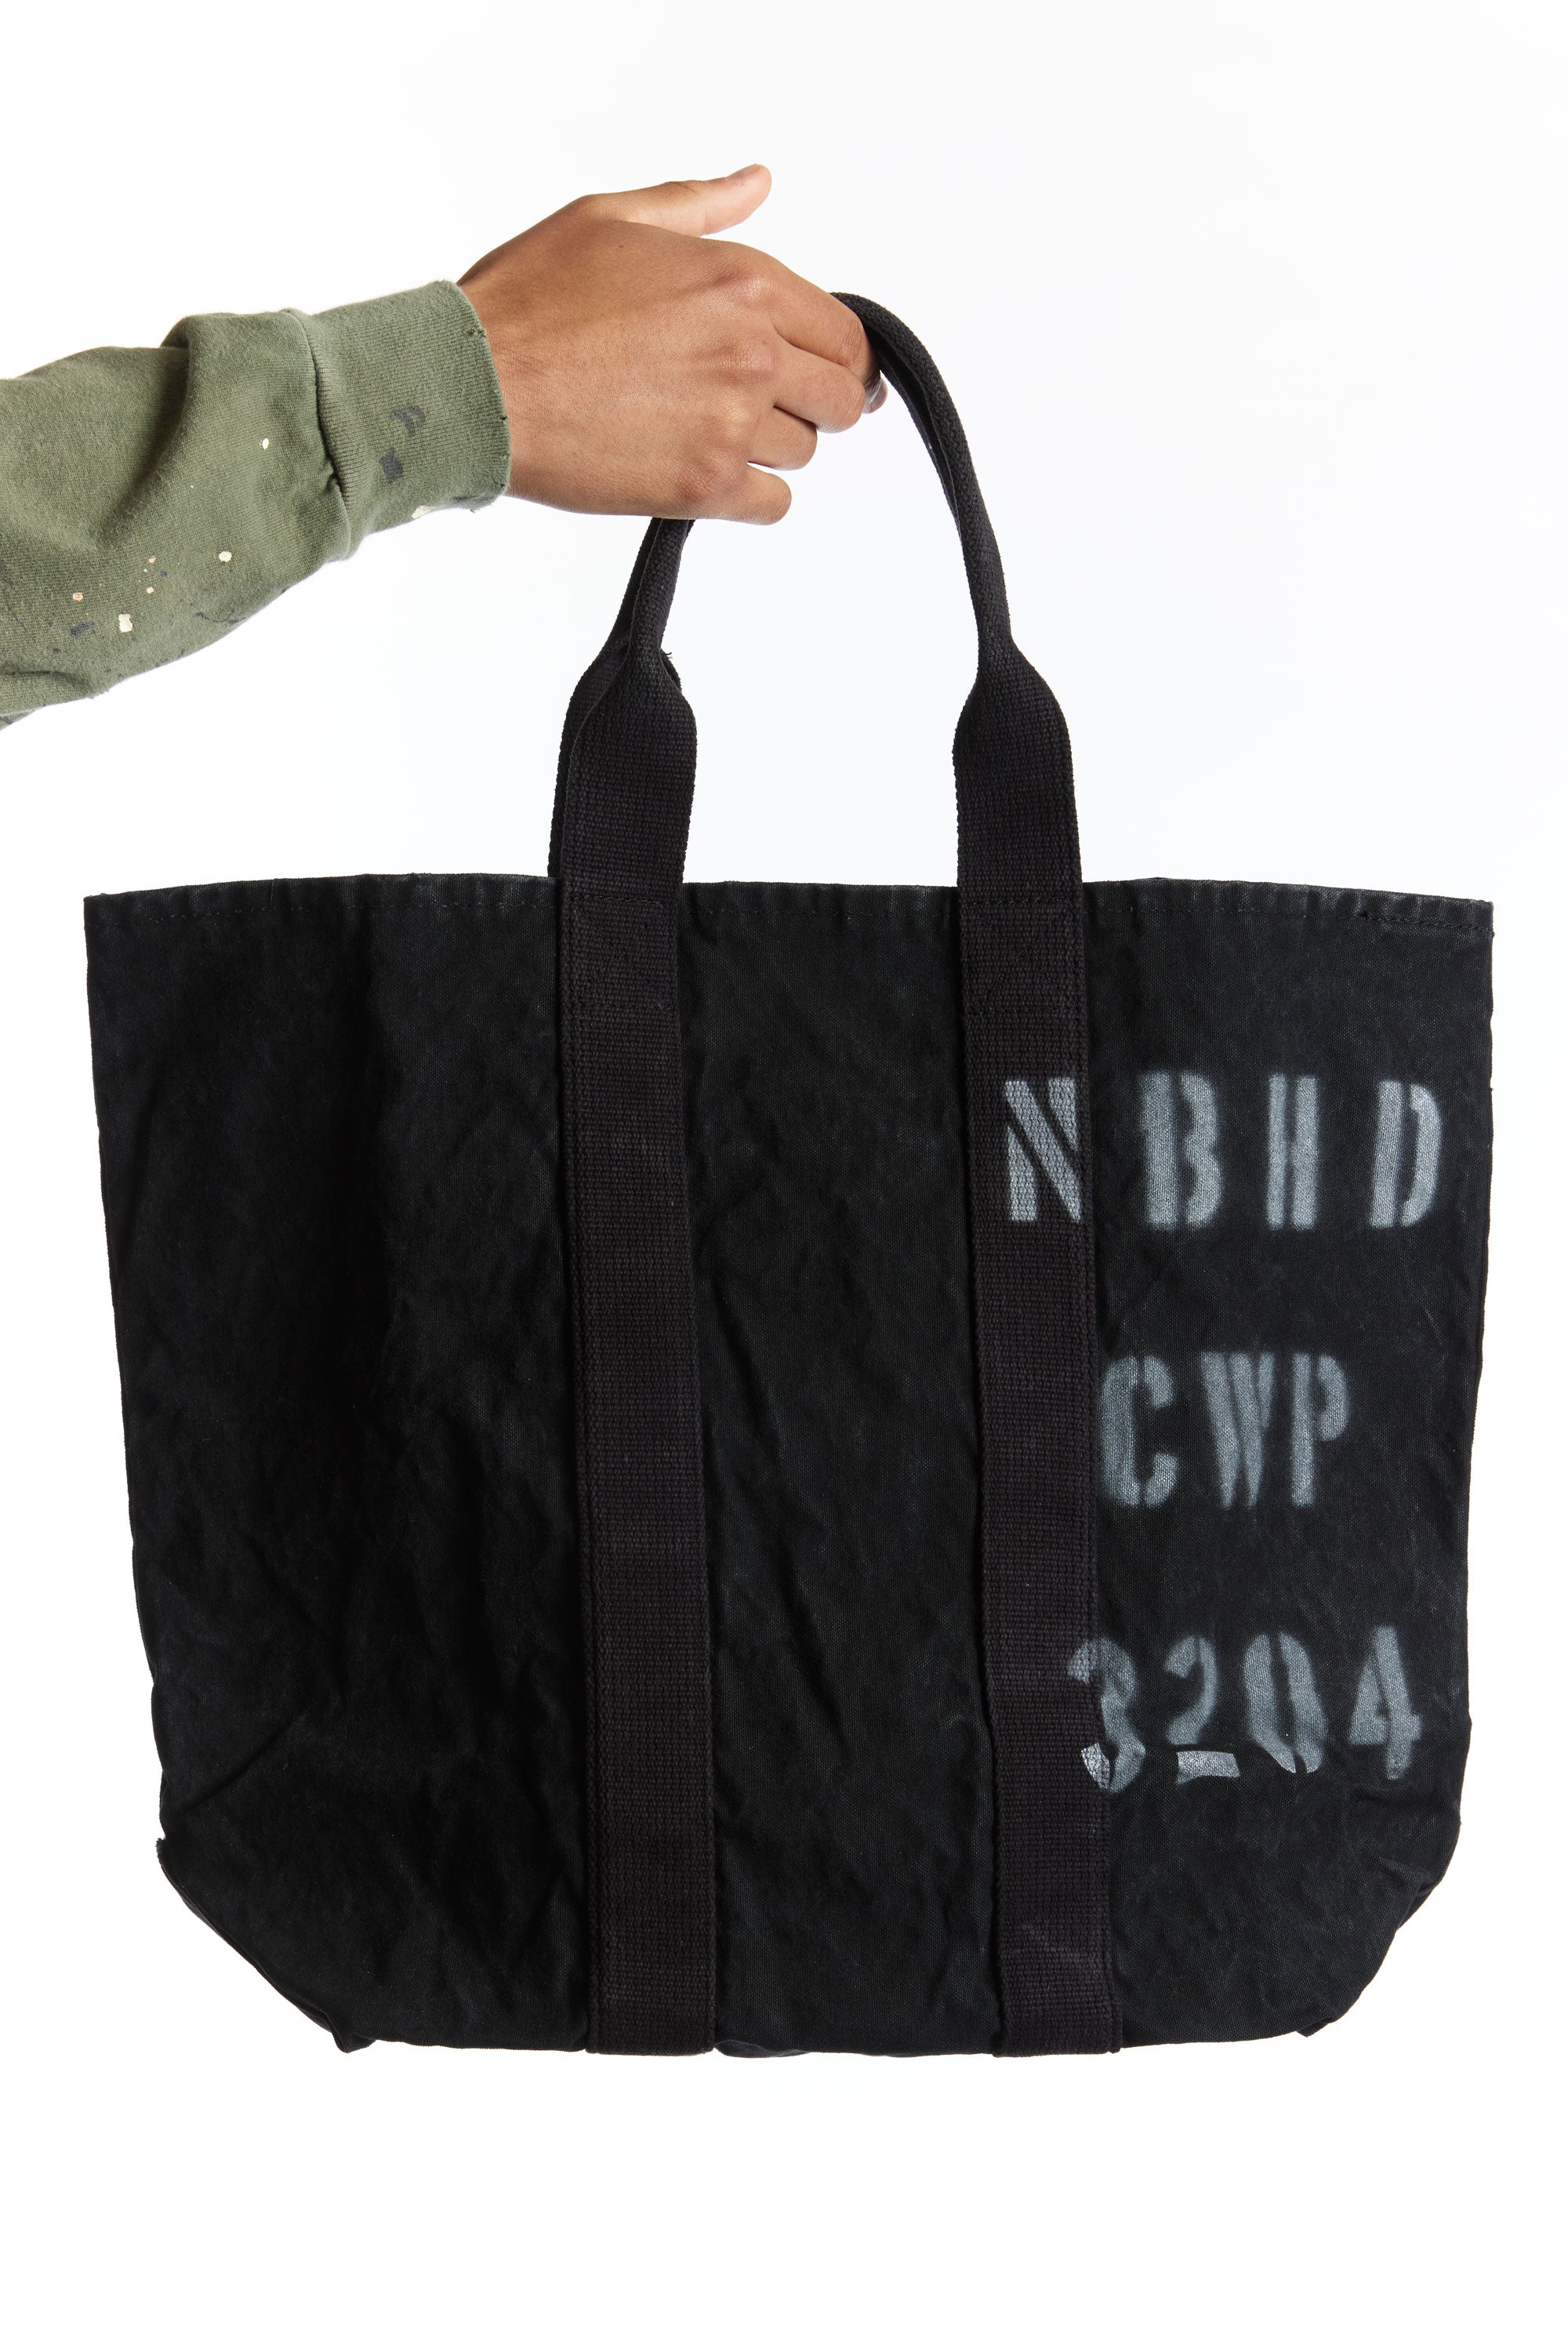 The NEIGHBORHOOD - CAVAS TOTE BAG BLACK available online with global shipping, and in PAM Stores Melbourne and Sydney.